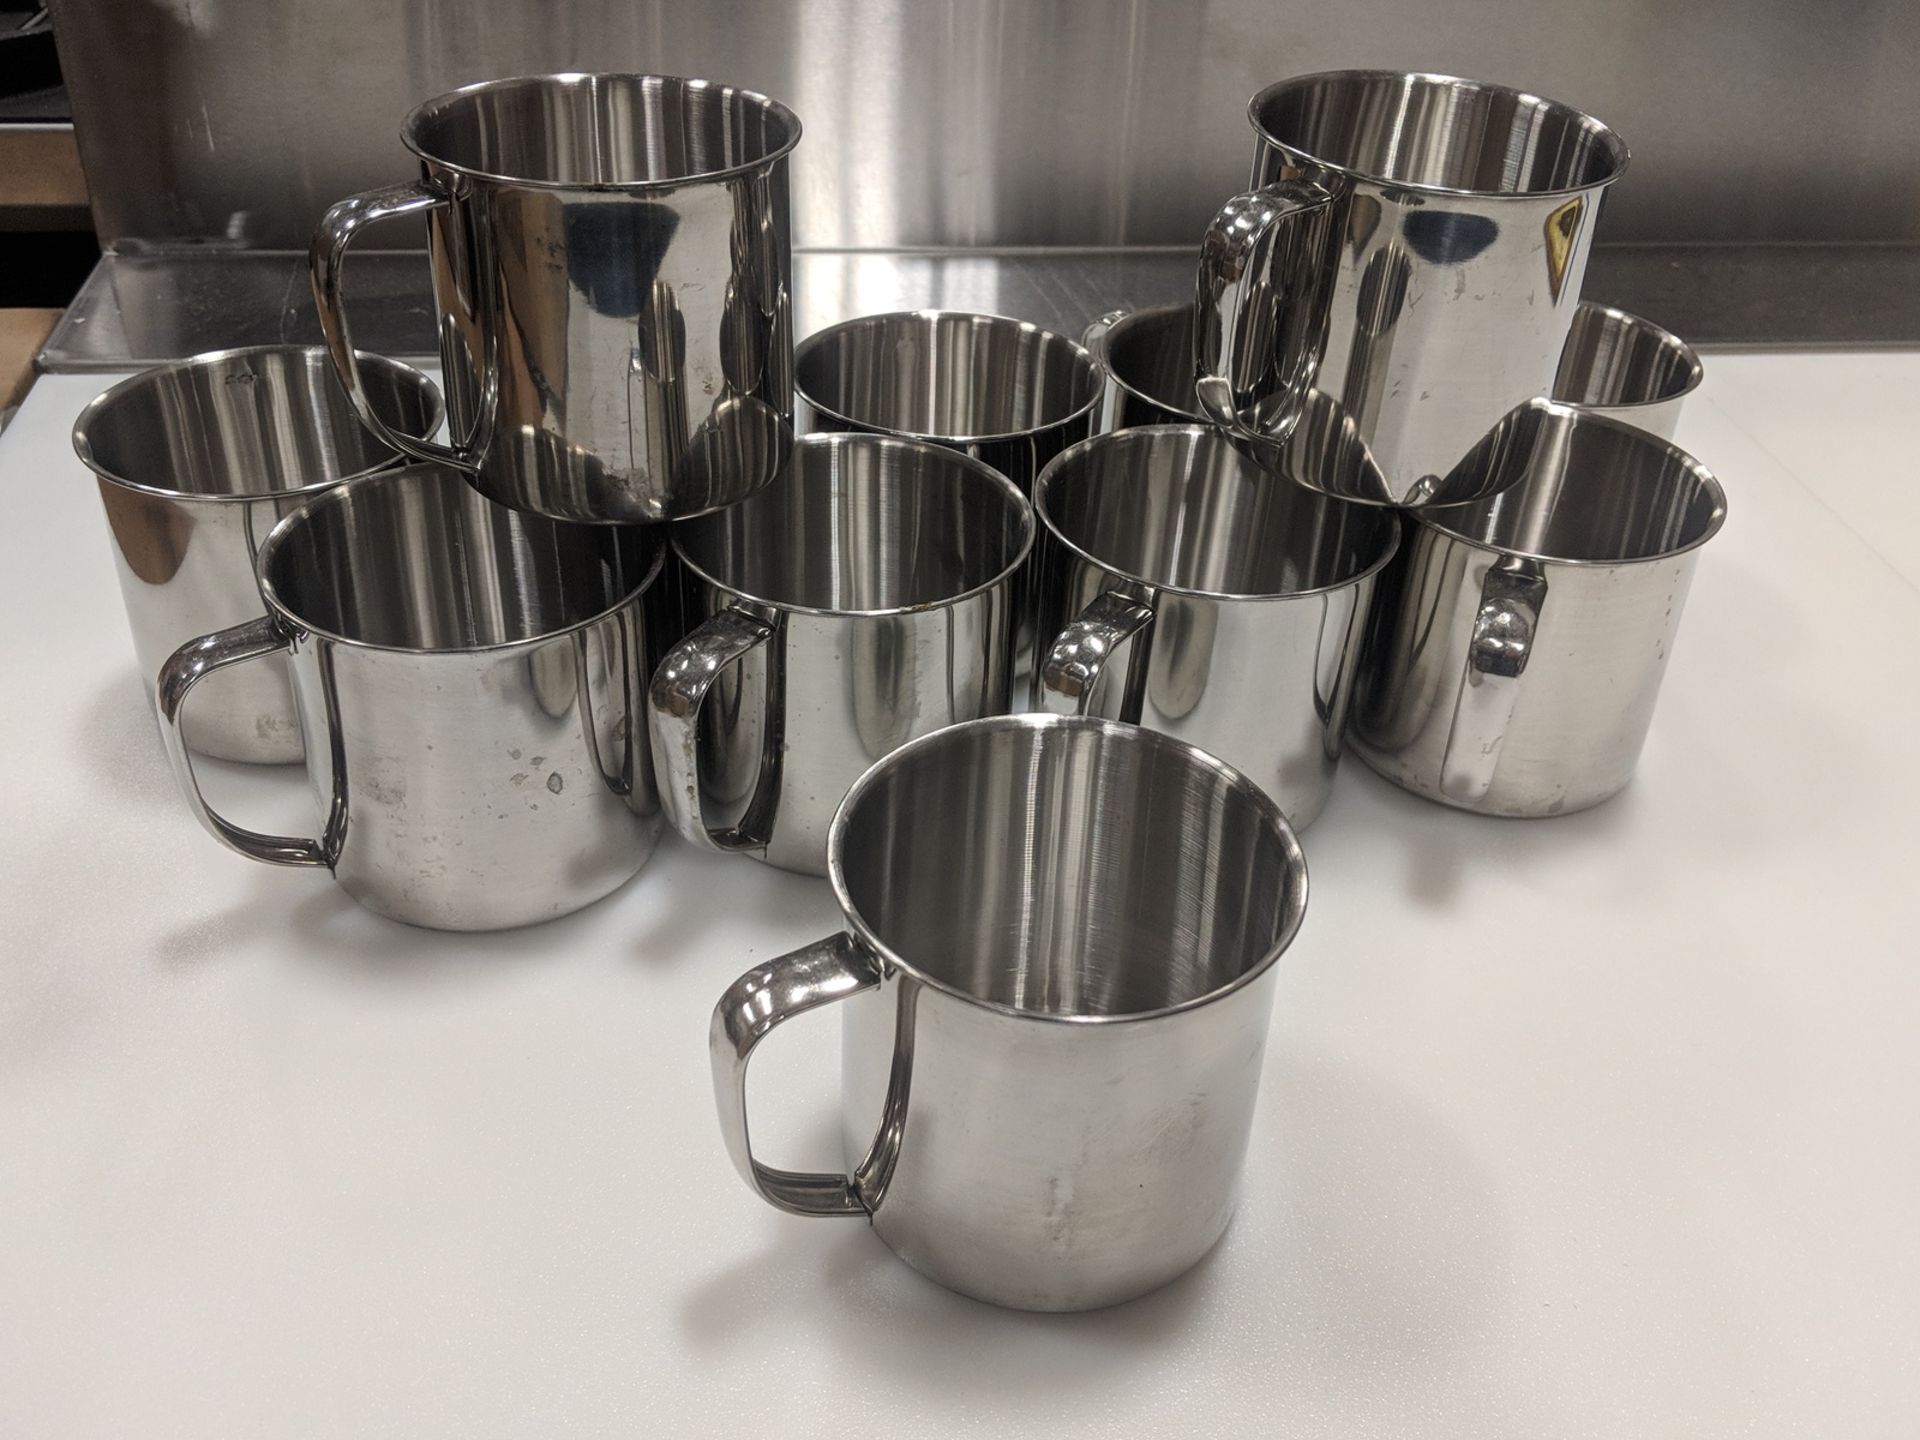 Small Stainless Steel Mugs - Lot of 12